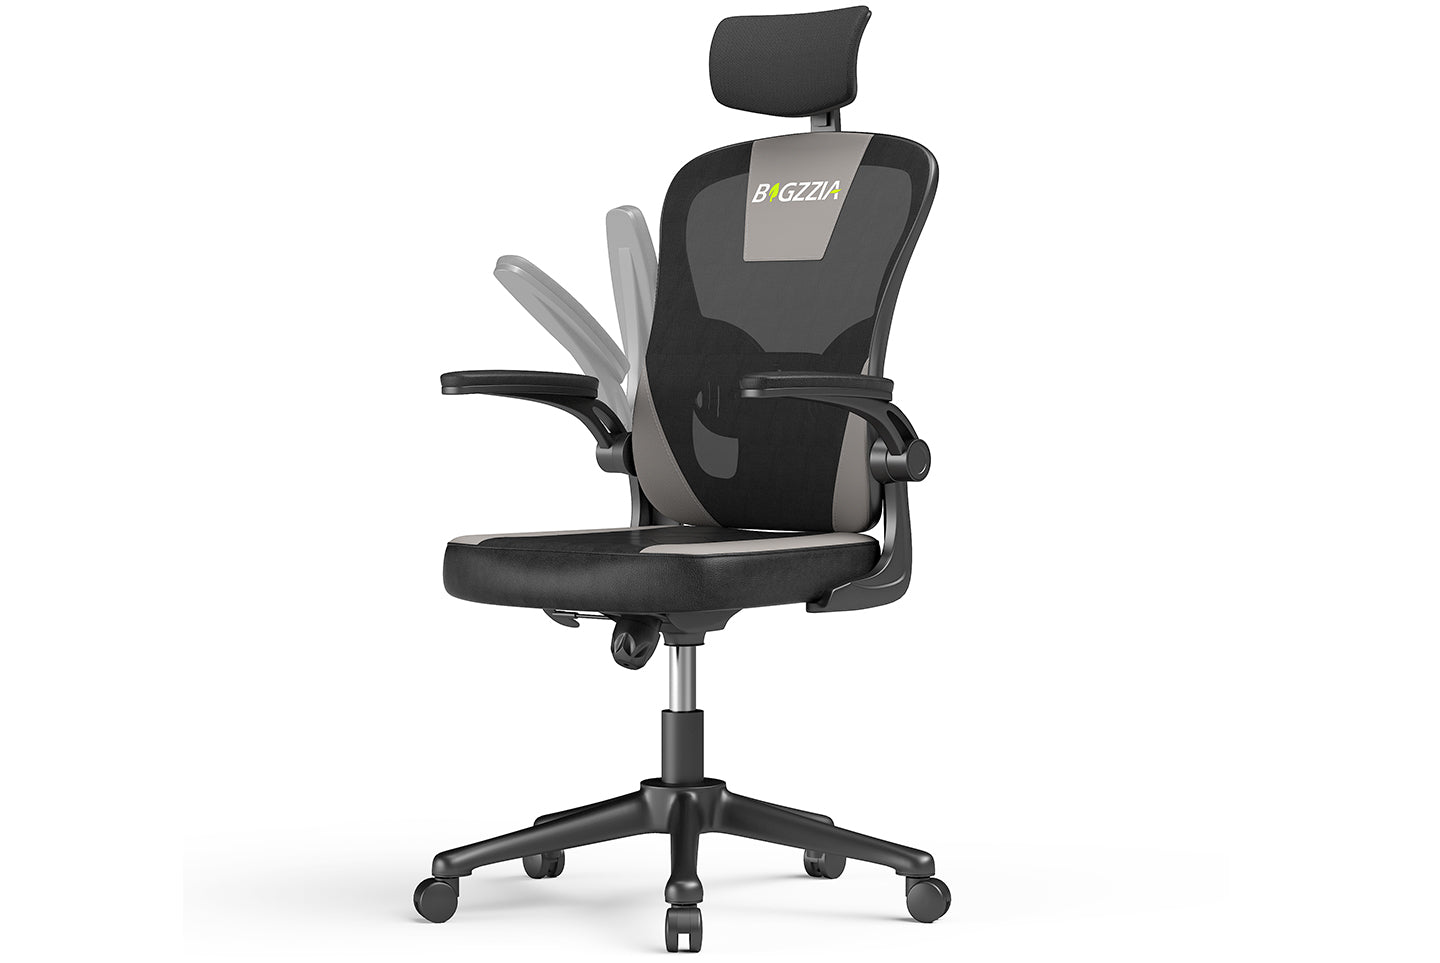 Ergonomic Chairs Computer Desk Chair with Adjustable Headrest Fold-up Armrest Office Gaming Chair Grey/Black